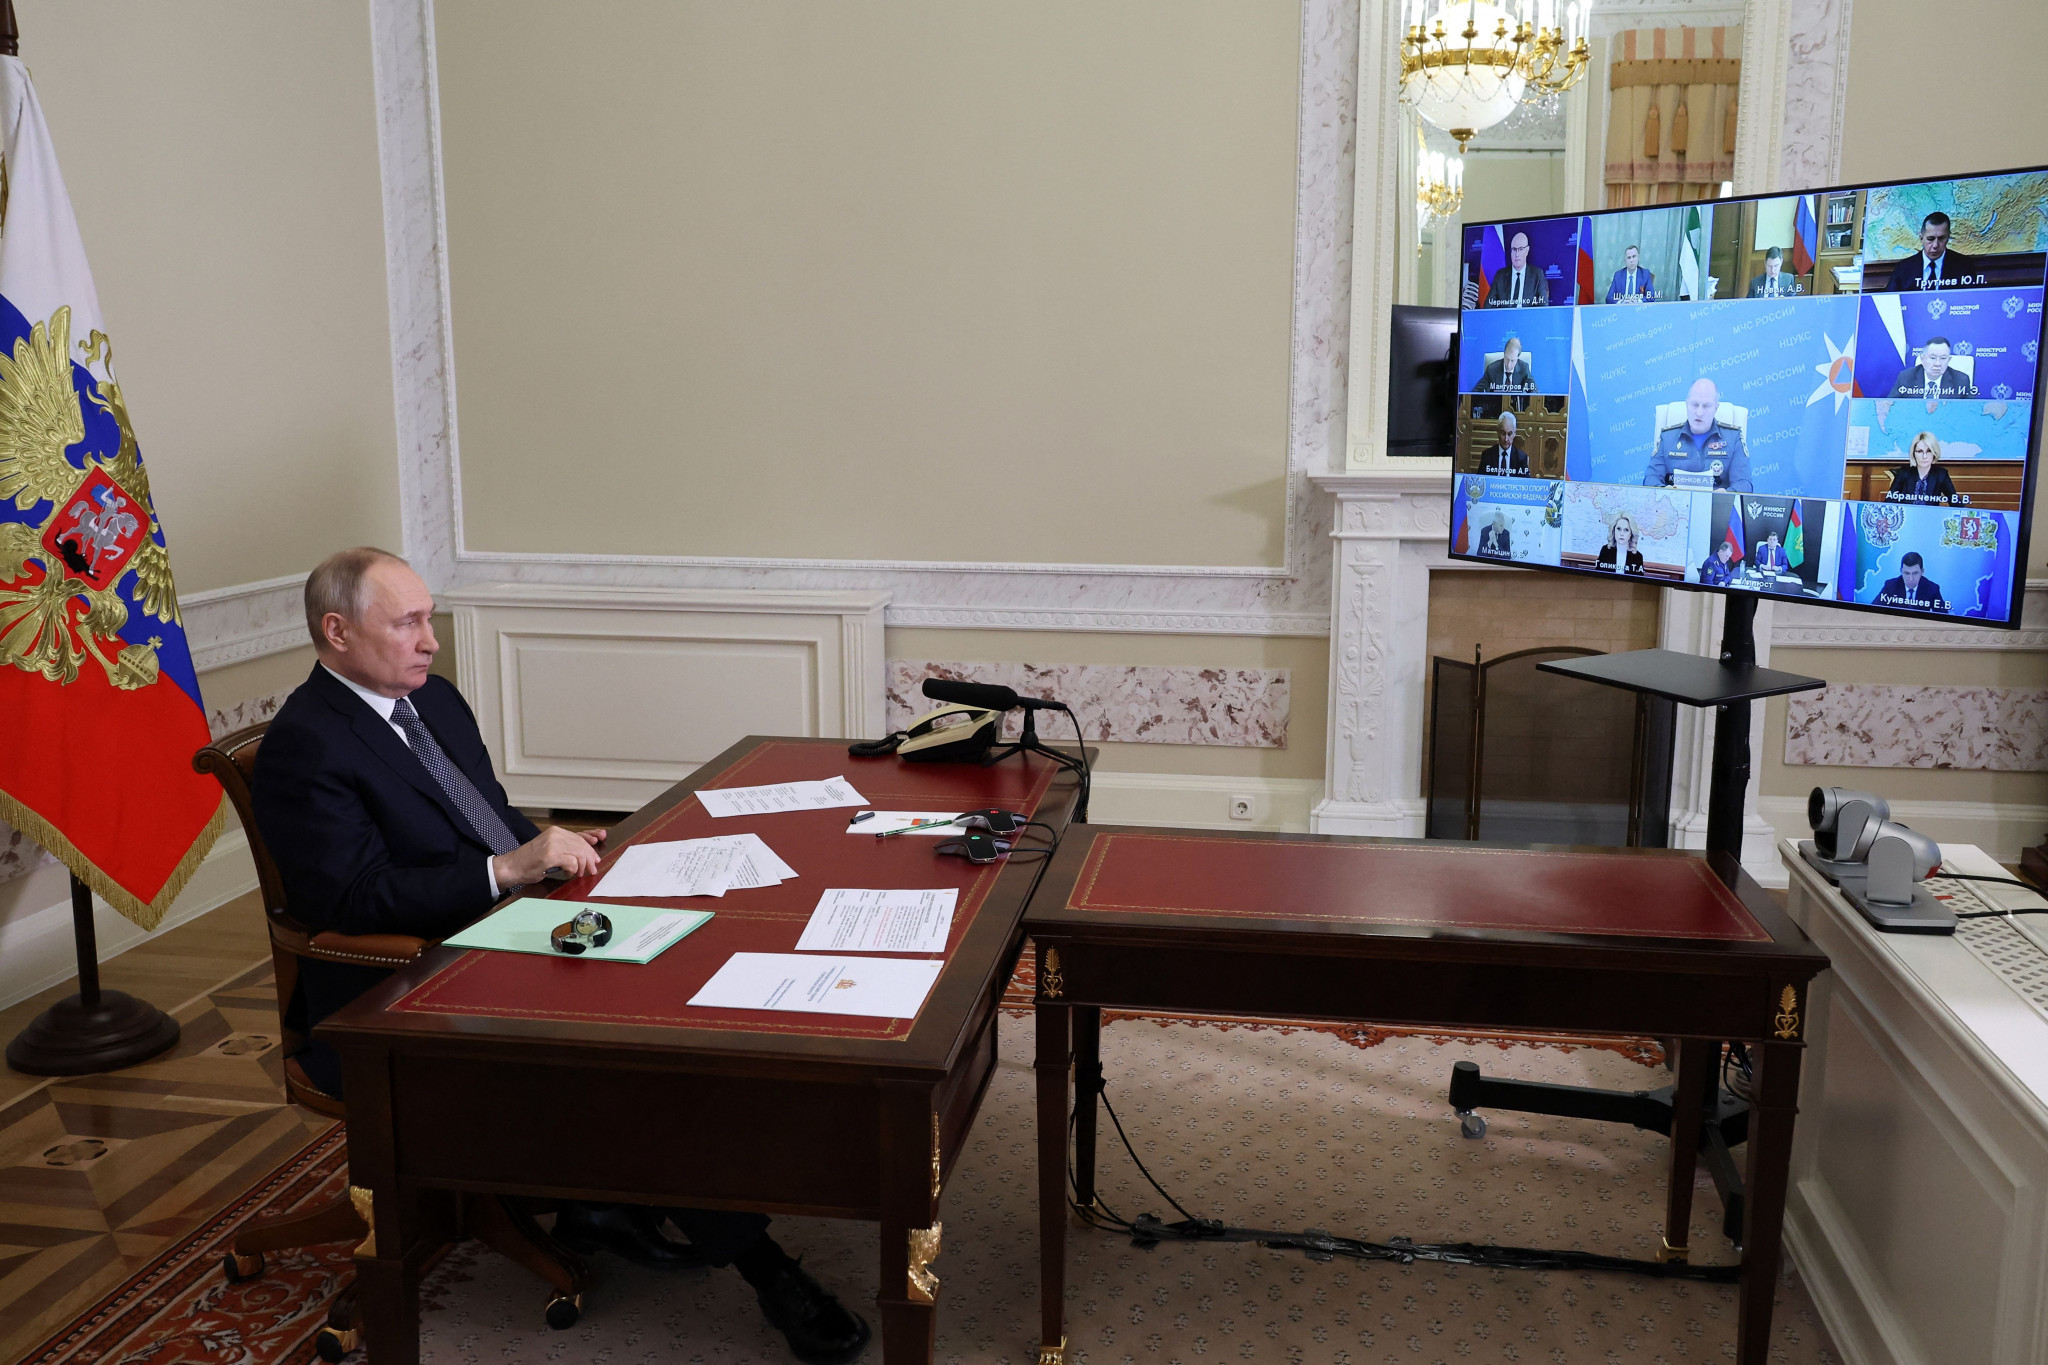 Russian President Vladimir Putin heard Oleg Matytsin's report on prospects of Olympic participation from his office in St Petersburg ©Getty Images